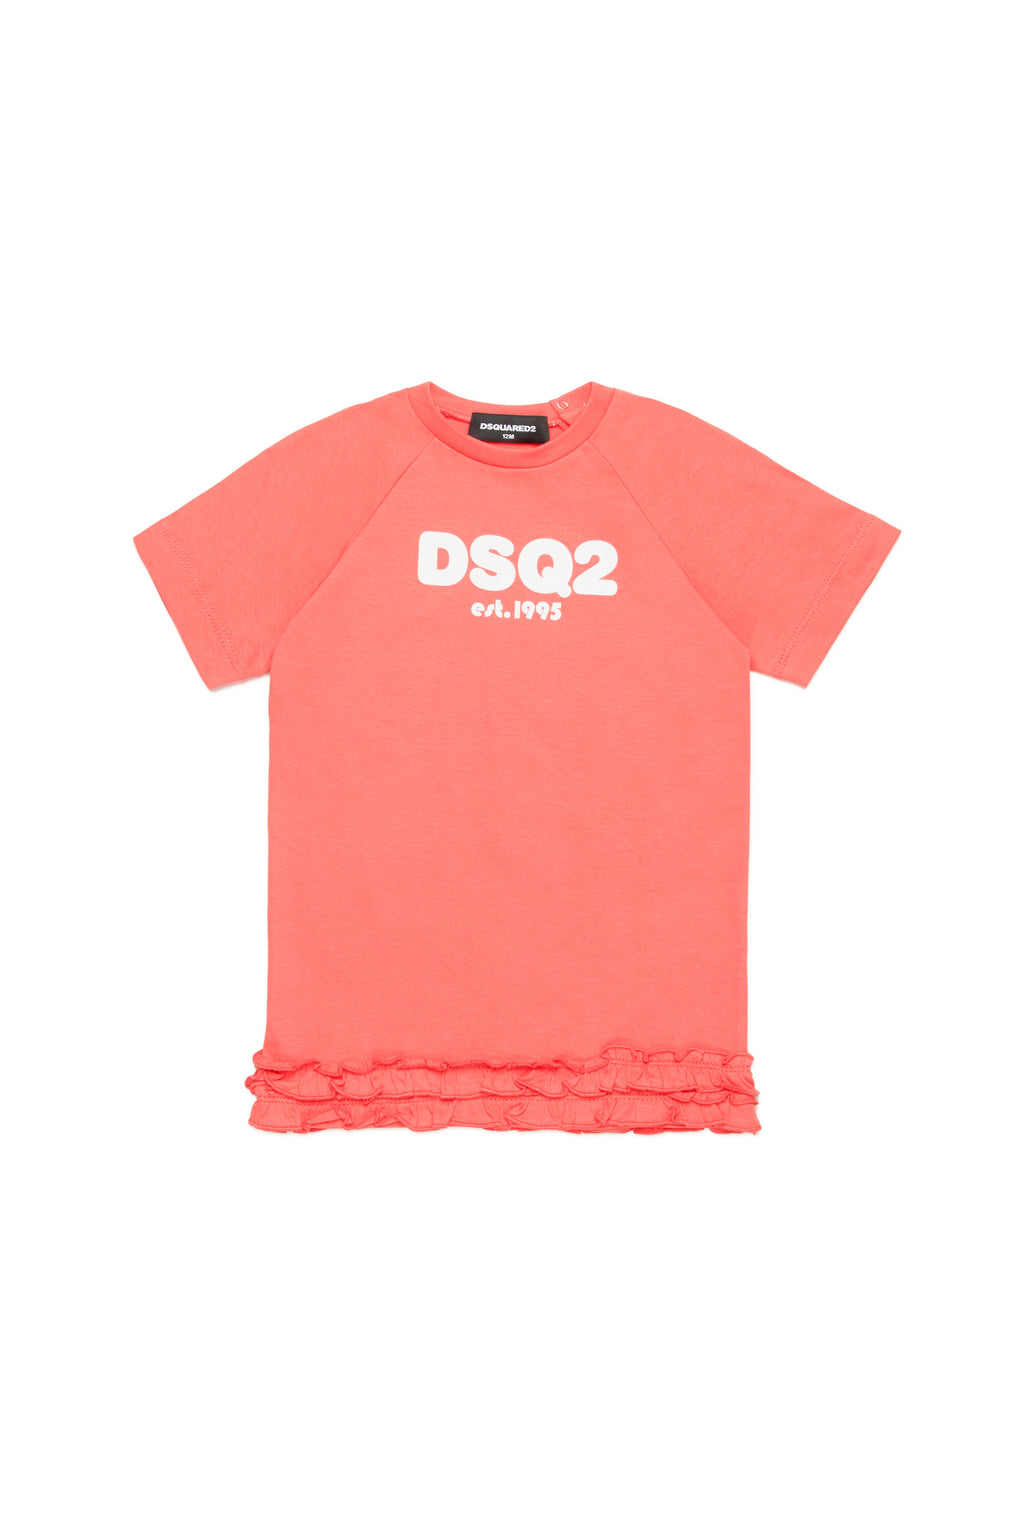 DSQ2 est.1995 branded dress with ruffles